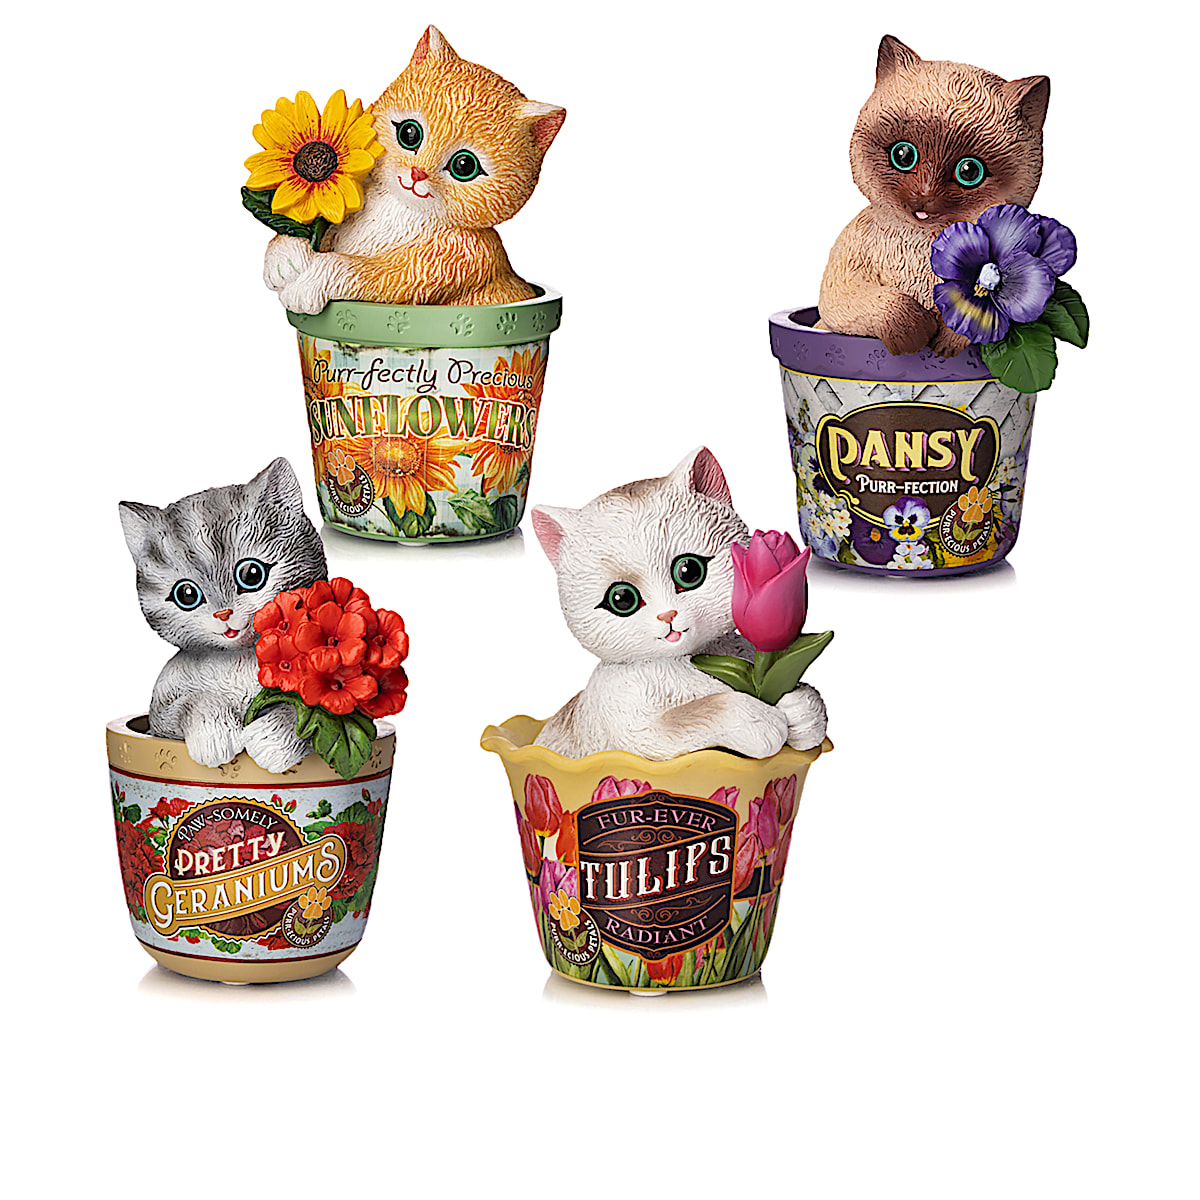 Purr-fectly Precious Sunflower Inspired By The Art Of Kayomi Harai  Featuring A Hand-Painted Cat Figurine In A Flowerpot Adorned With Paw Prints